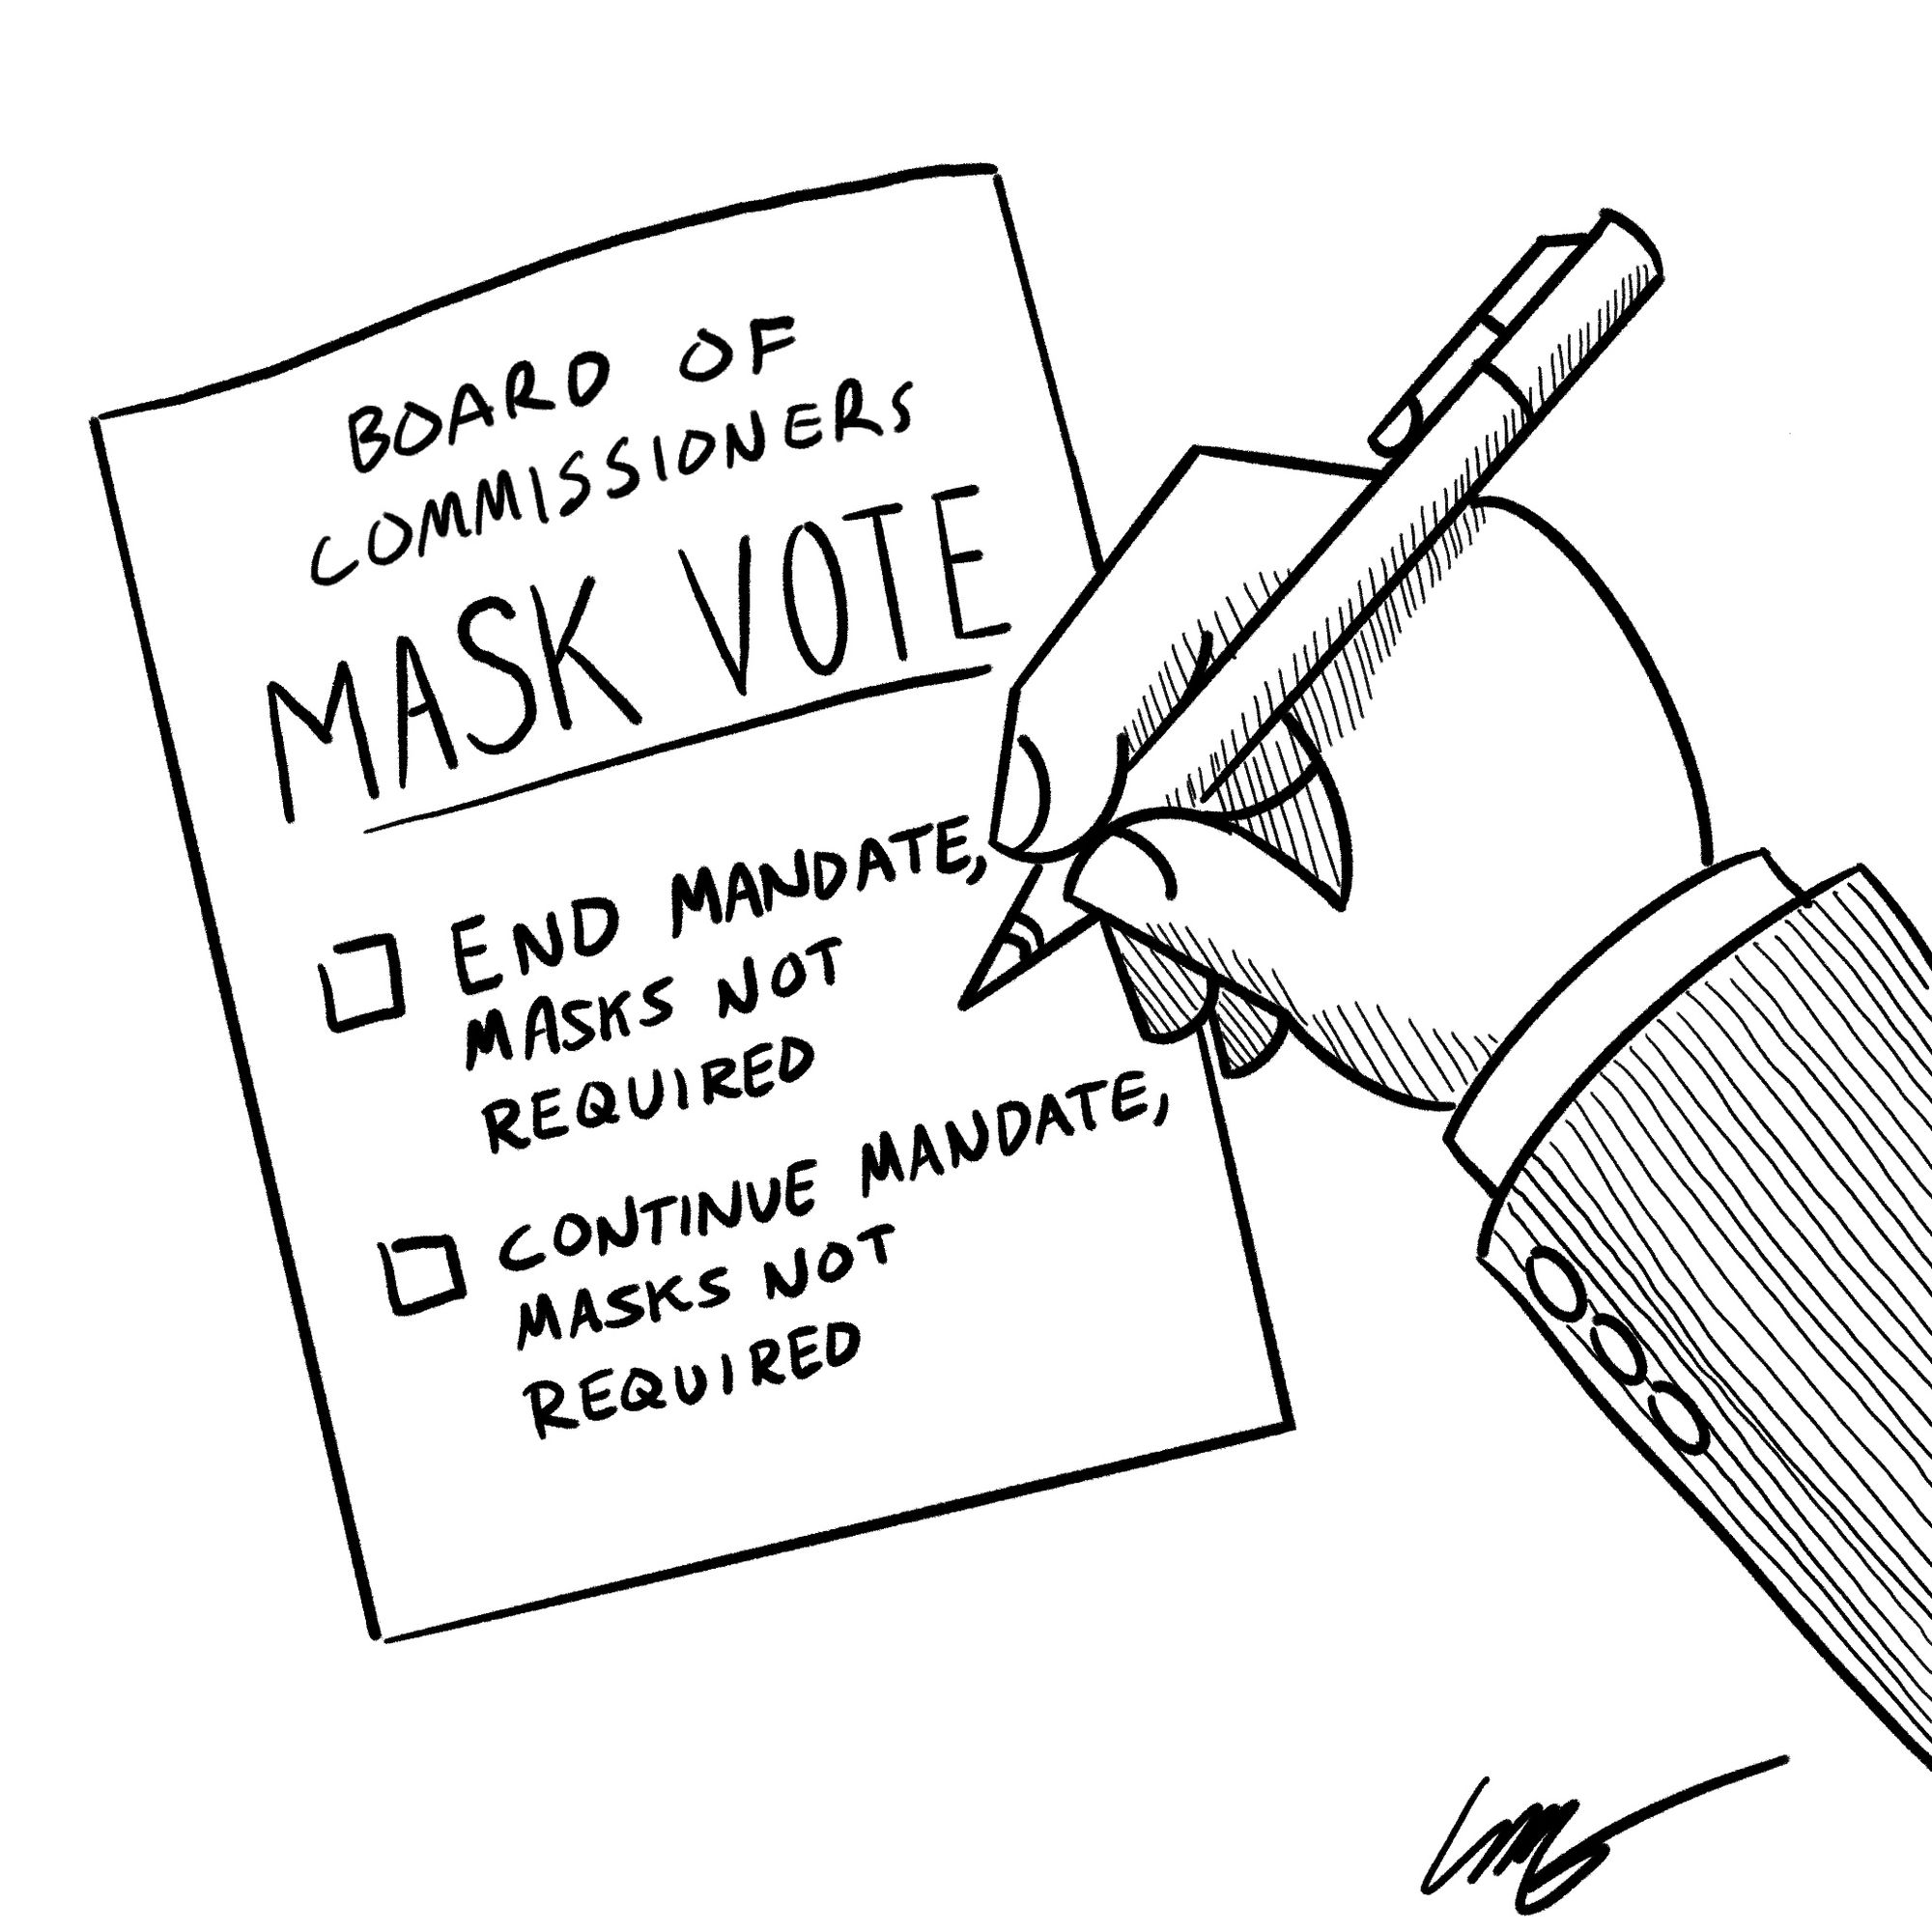 Hand-drawn comic of a hand holding a pen, poised over a ballot that reads “Board of Commissioners MASK VOTE:” with two options. First checkbox: “End Mandate, masks no